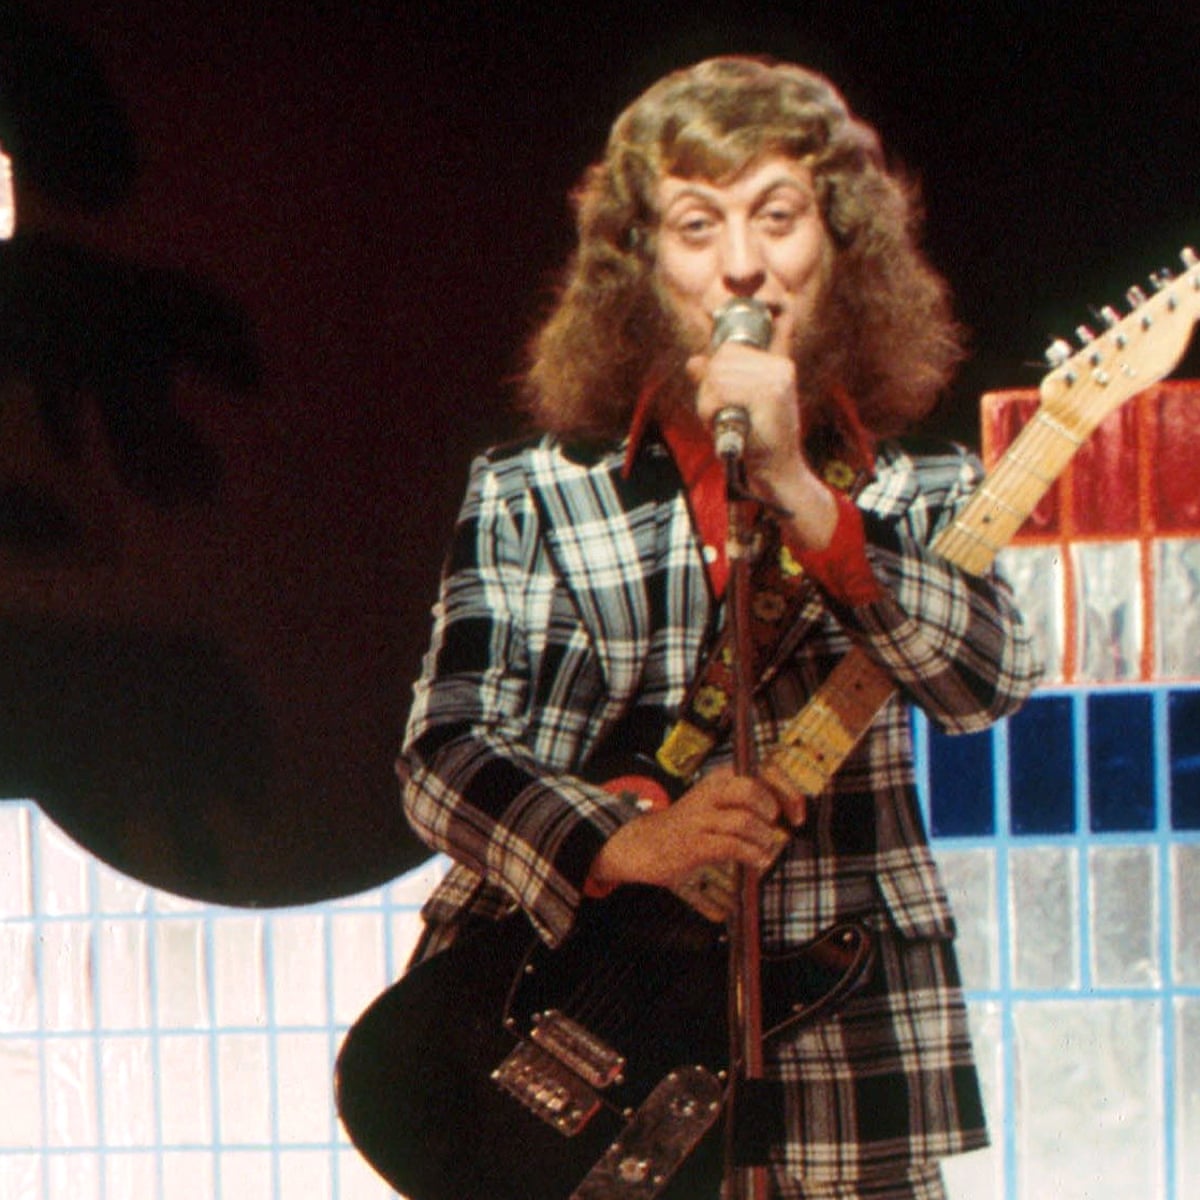 Slade's Noddy Holder diagnosed with cancer five years ago, wife reveals, Pop and rock